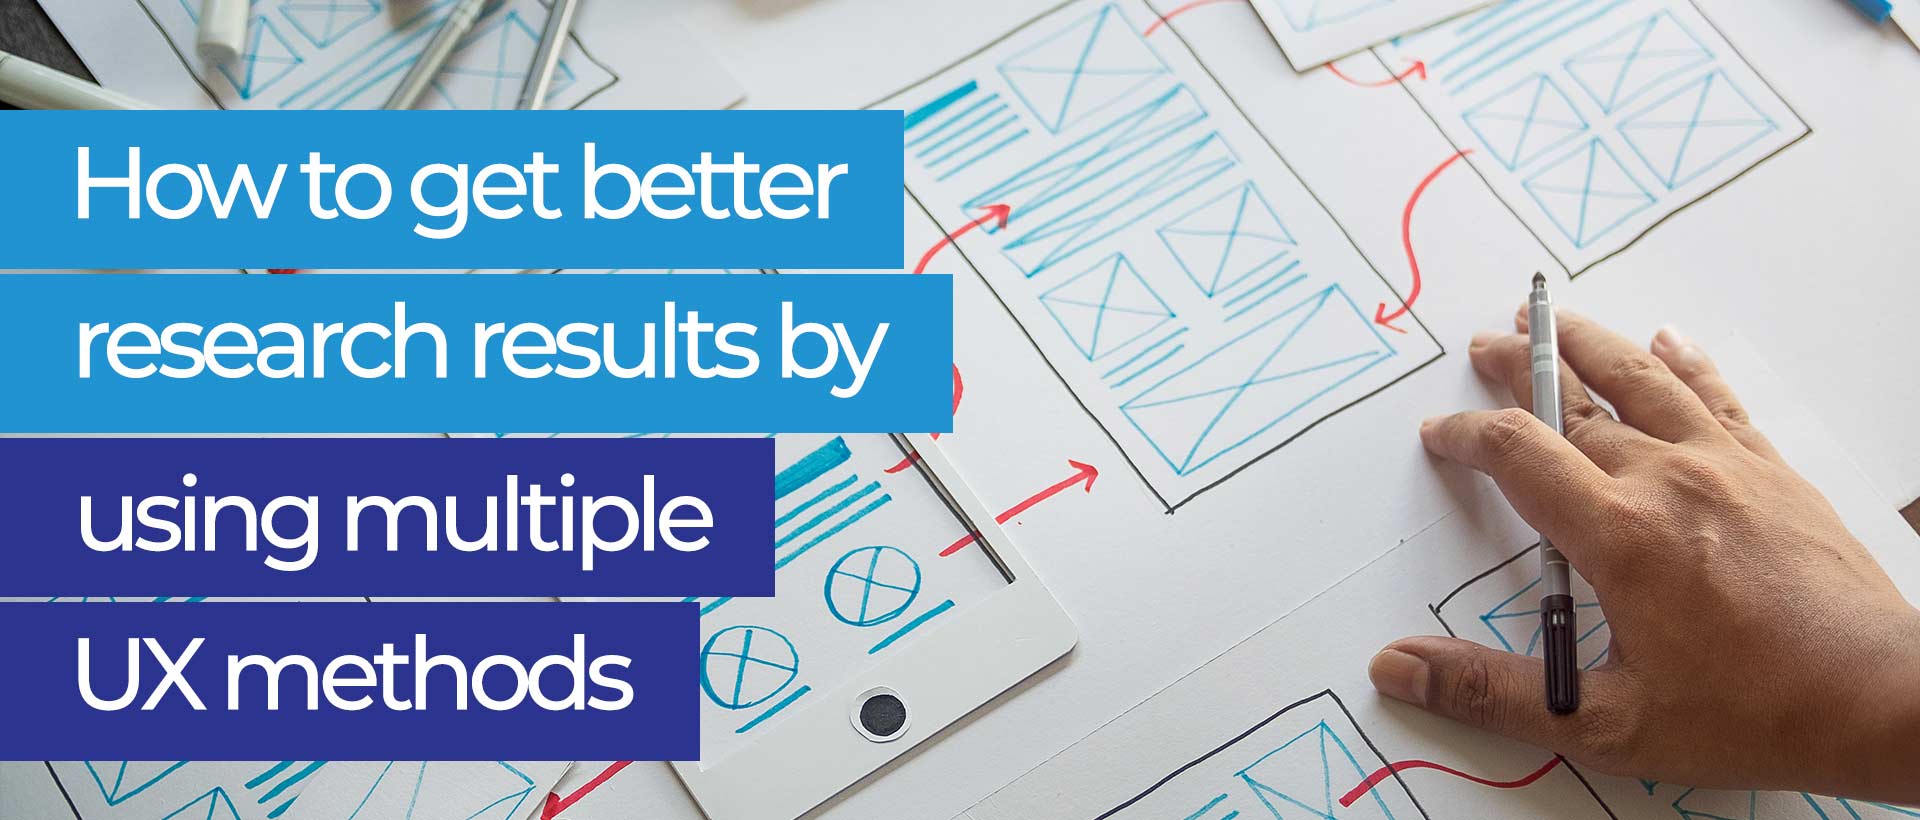 How to get better research results by using multiple UX methods.